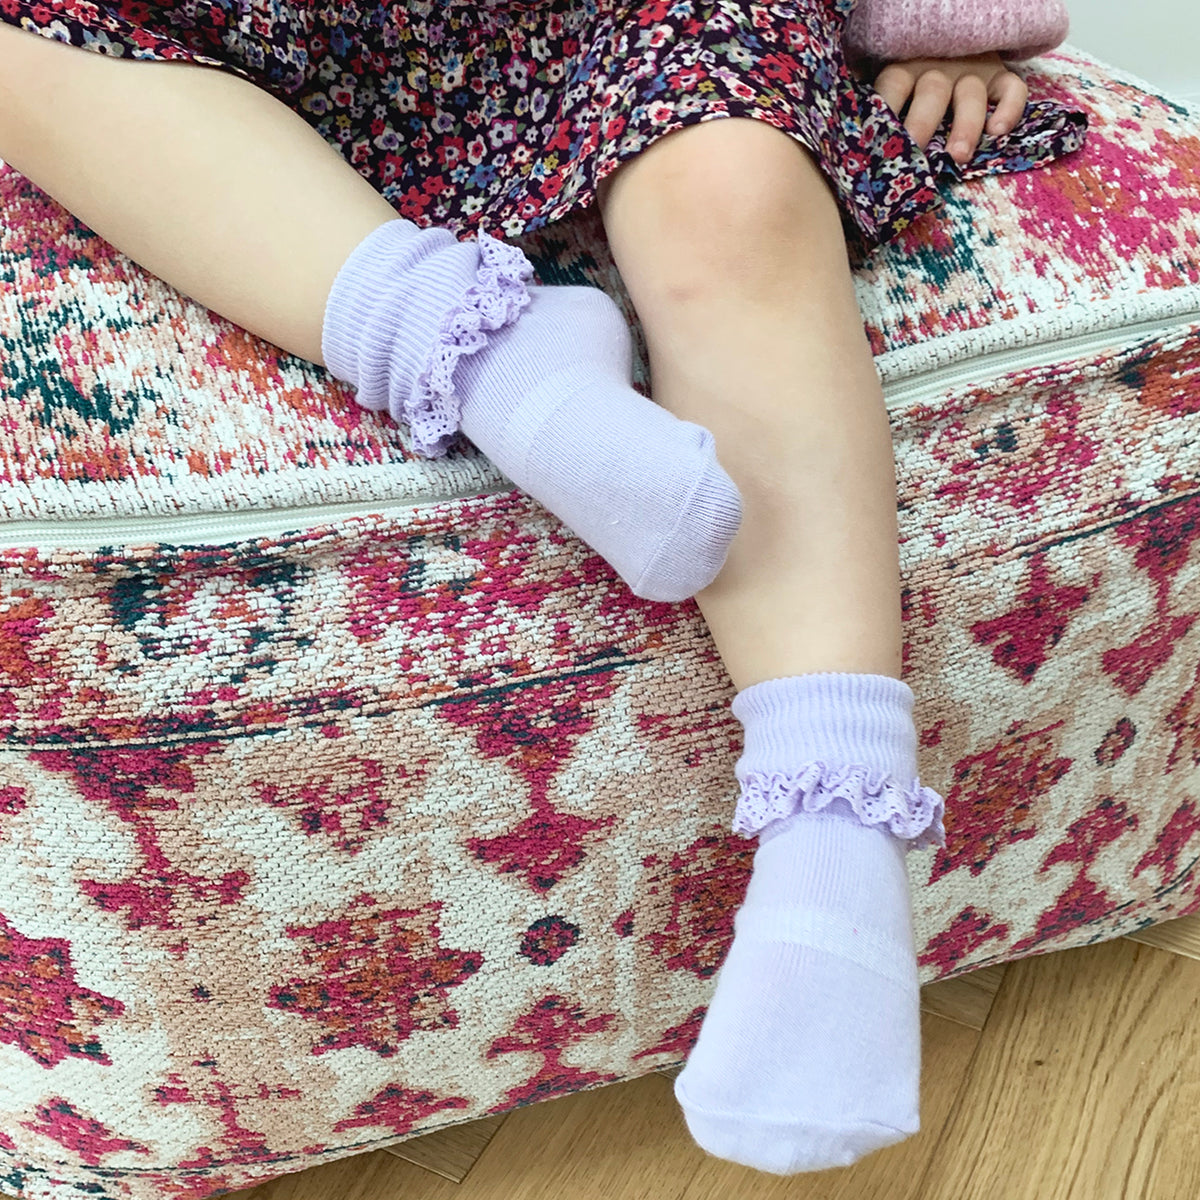 Frilly Non-Slip Stay-On Baby and Toddler Socks - 3 Pack in Navy, Paradiso and Amethyst